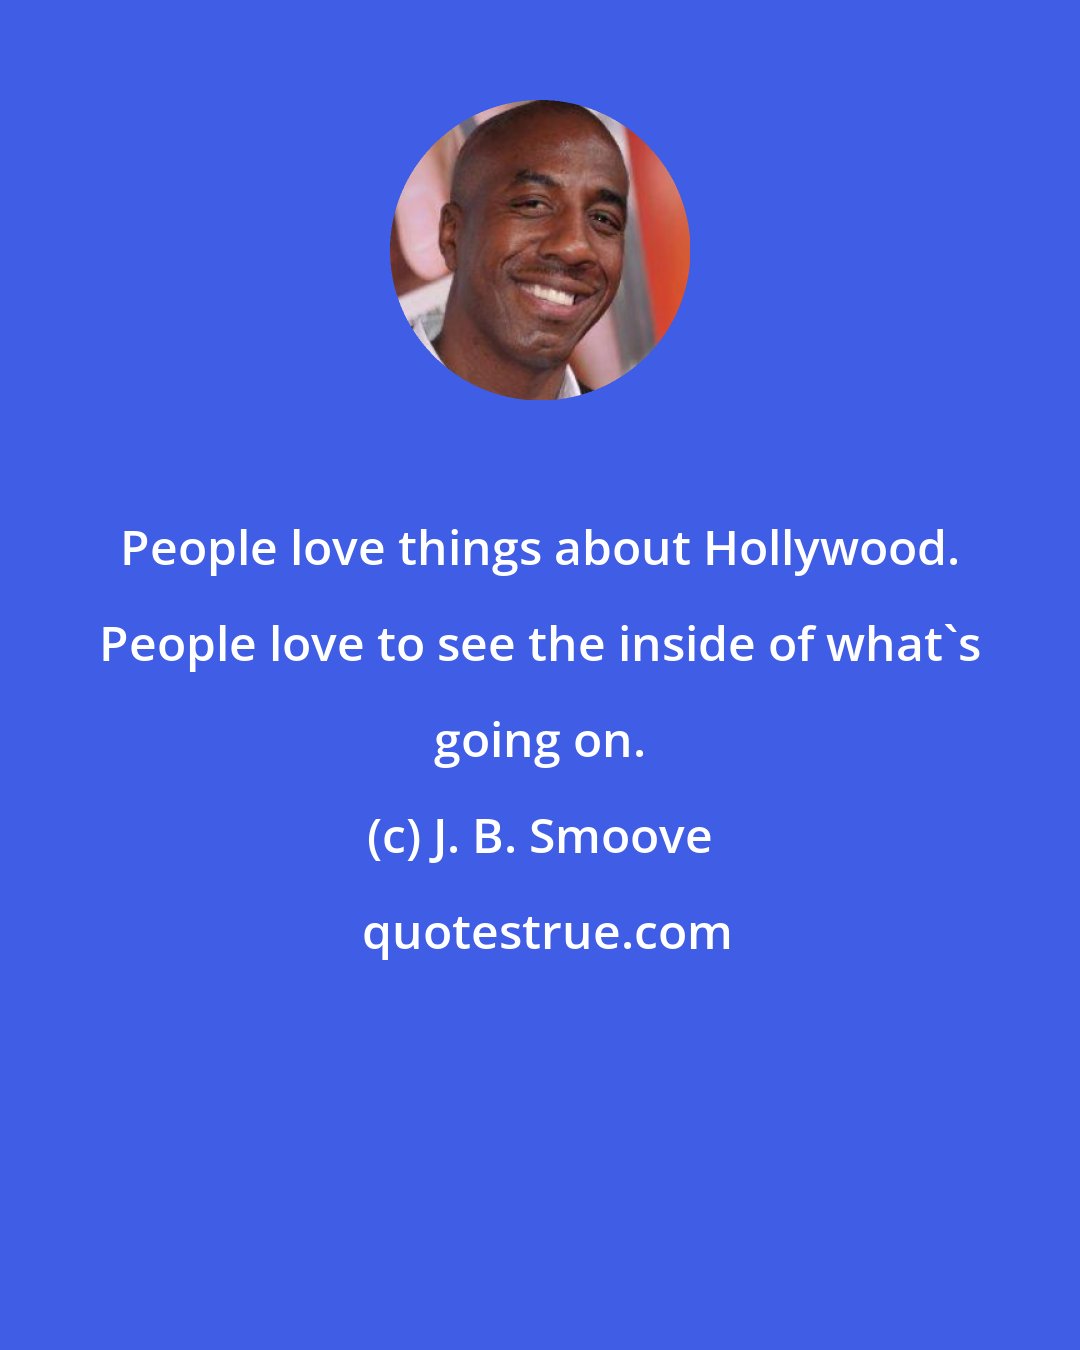 J. B. Smoove: People love things about Hollywood. People love to see the inside of what's going on.